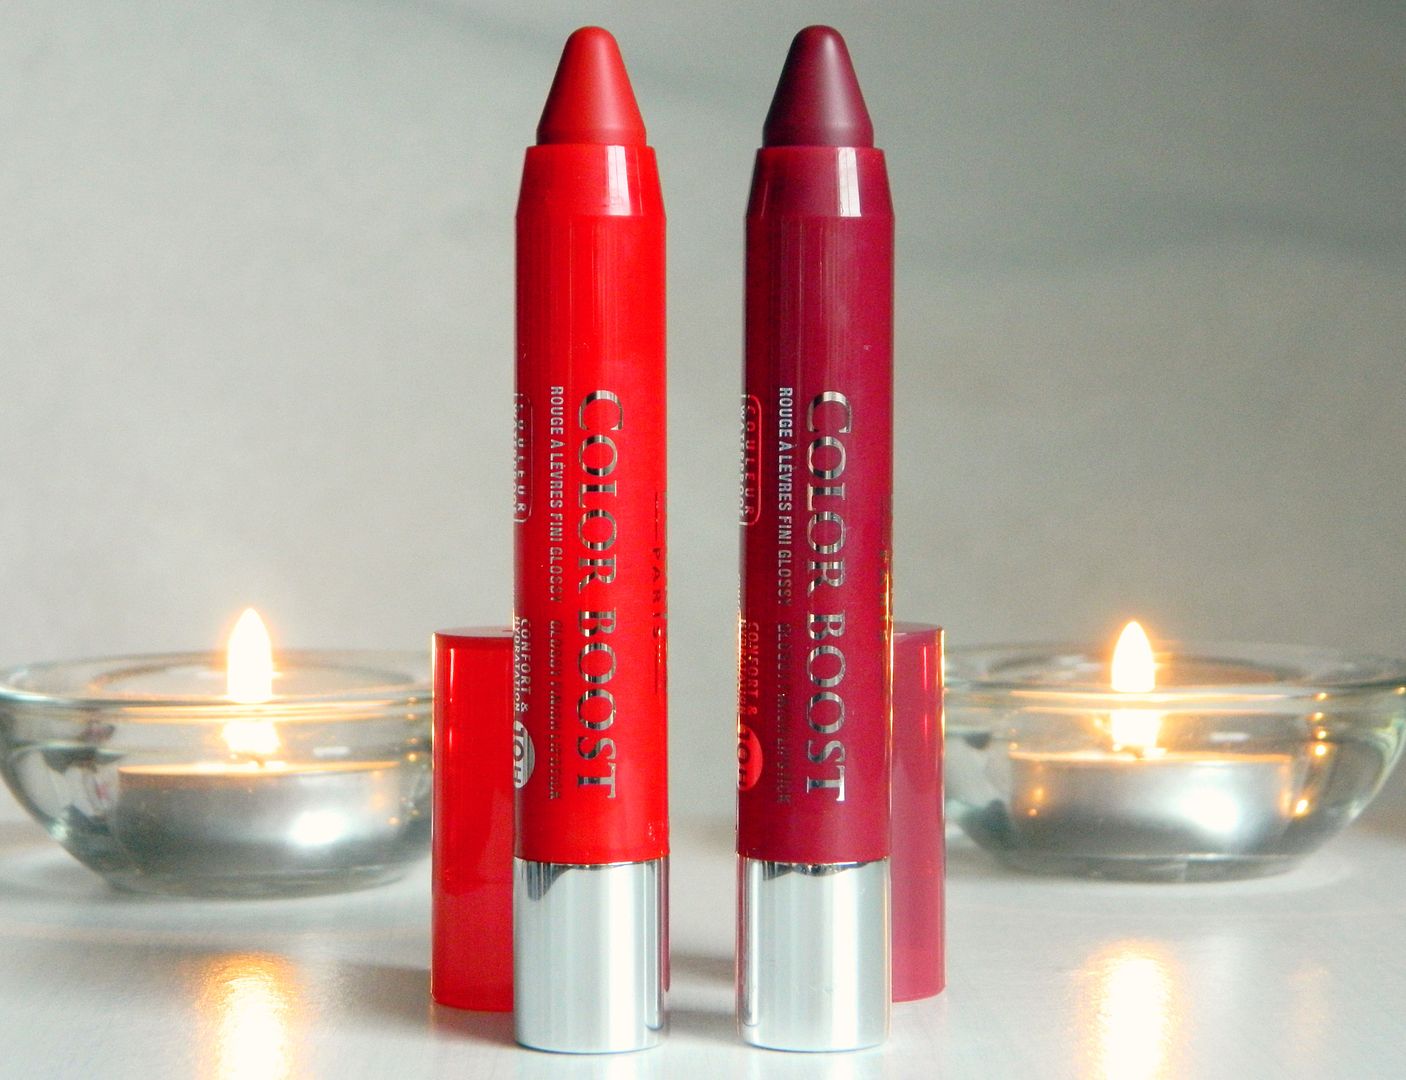 Bourjois Color Boost Lip Crayons Autumn Edition Red Island Plum Russian Packaging Review Belle-amie UK Beauty Fashion Lifestyle Blog